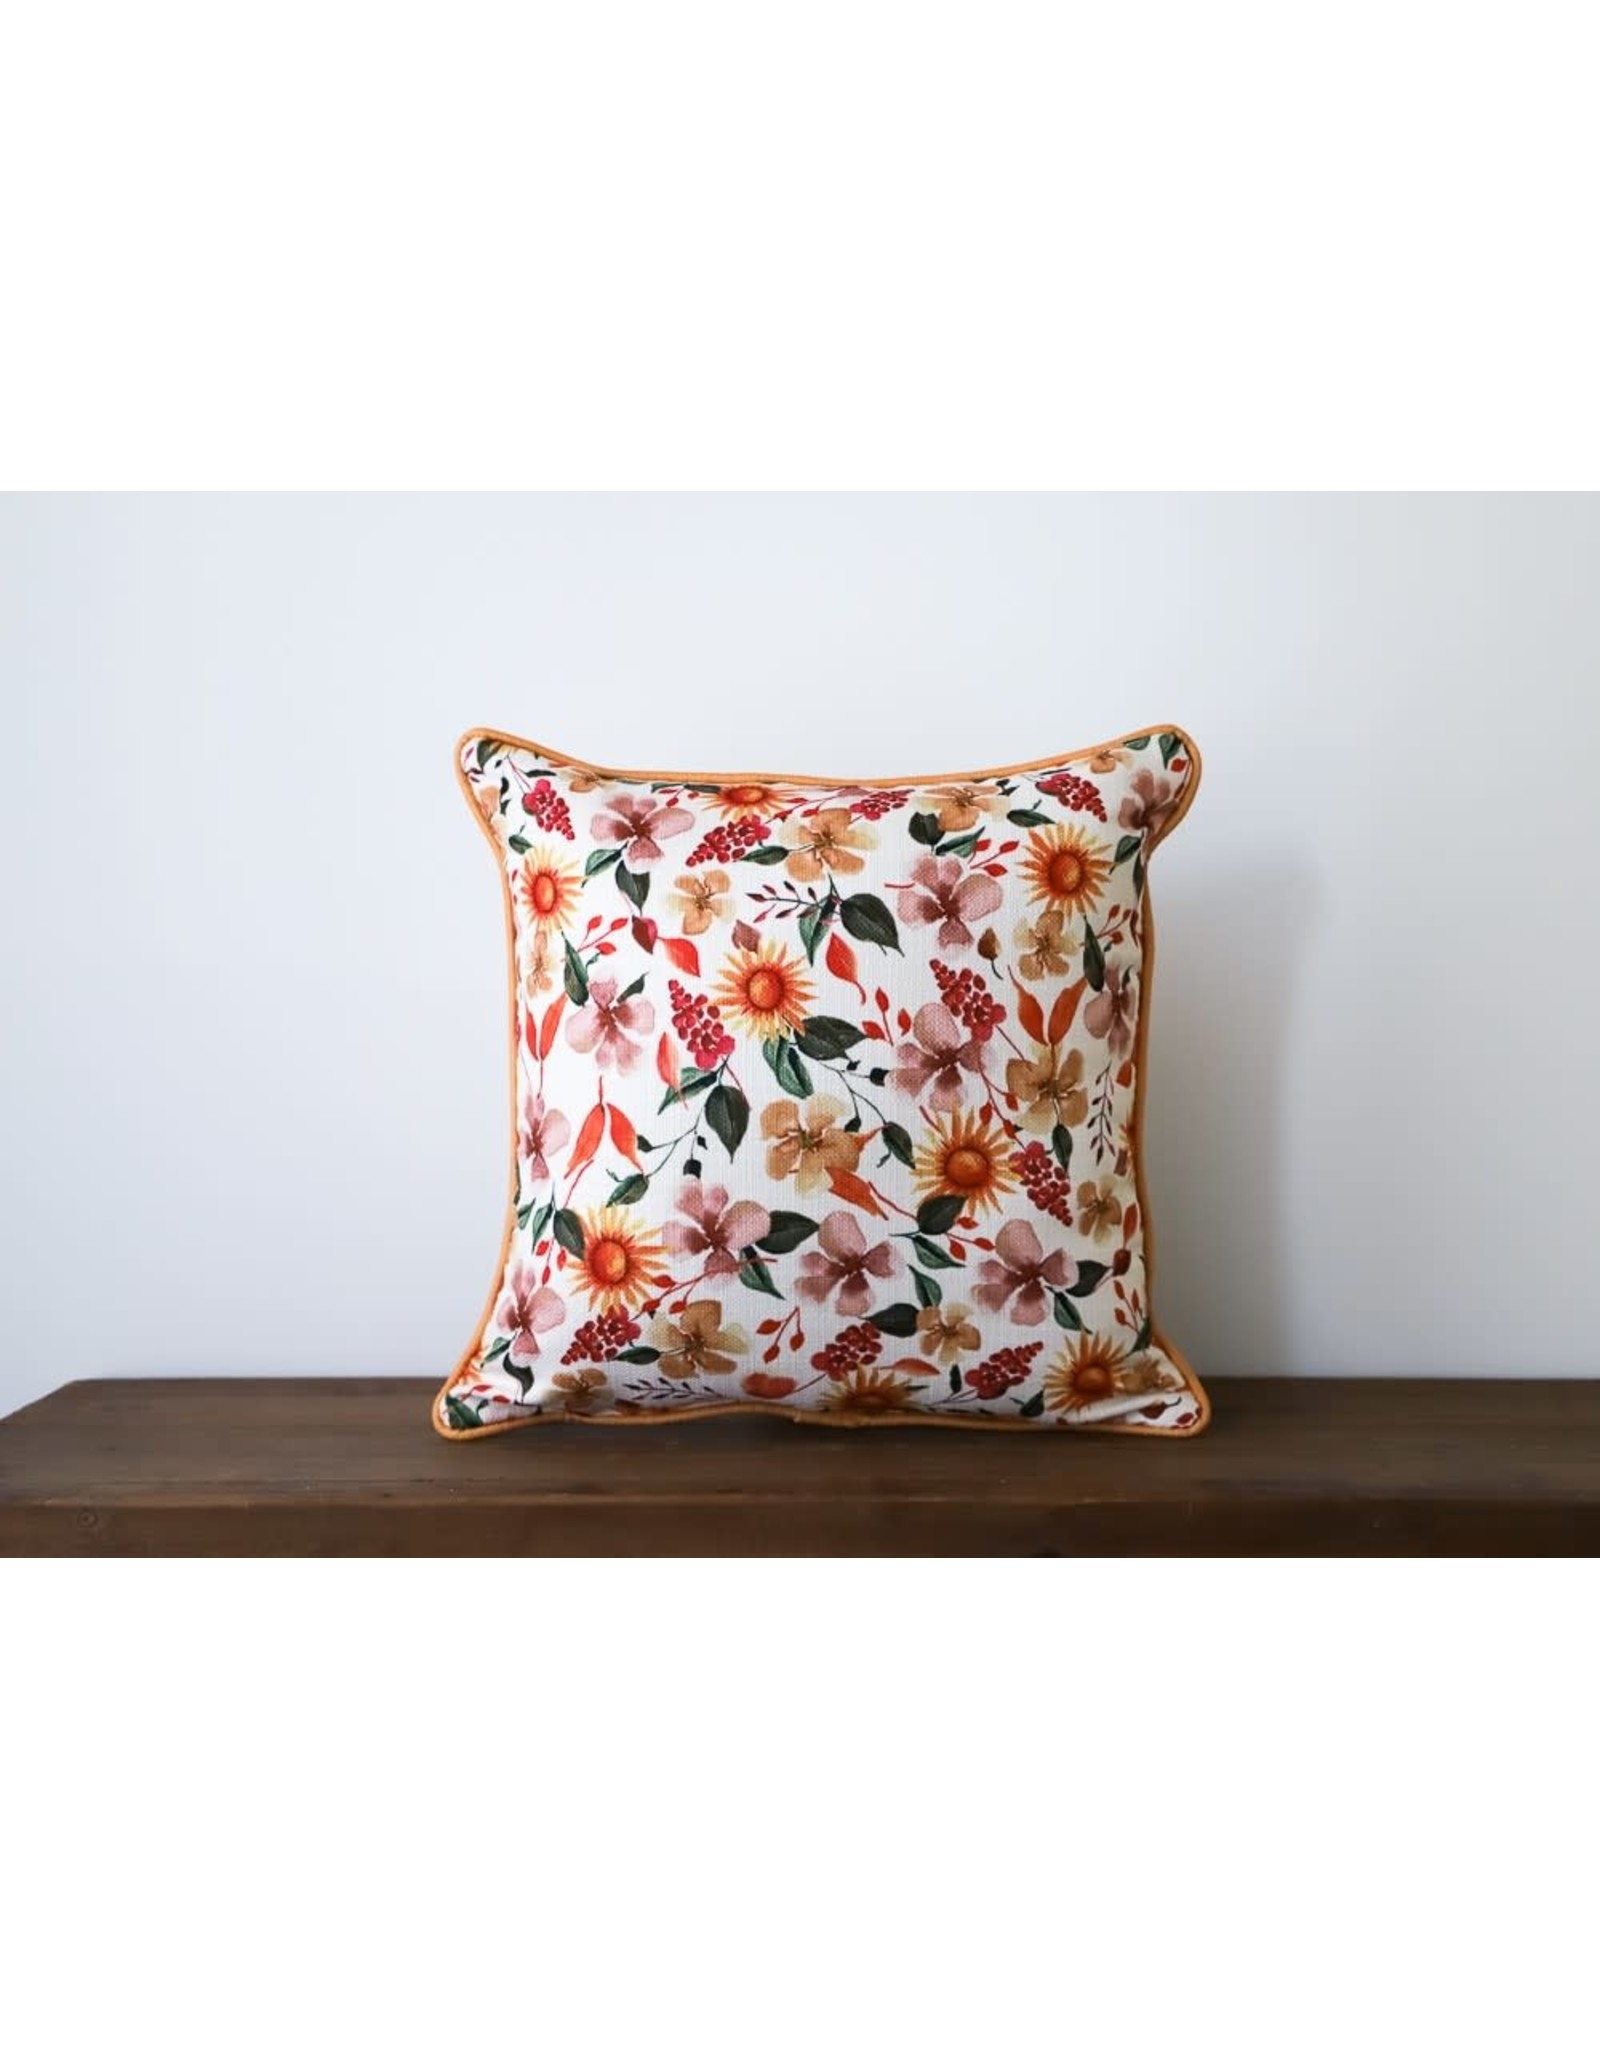 Little Birdie Pillow - Every Morning New Mercies (with Rust Color Piping & Floral Patterned Back)